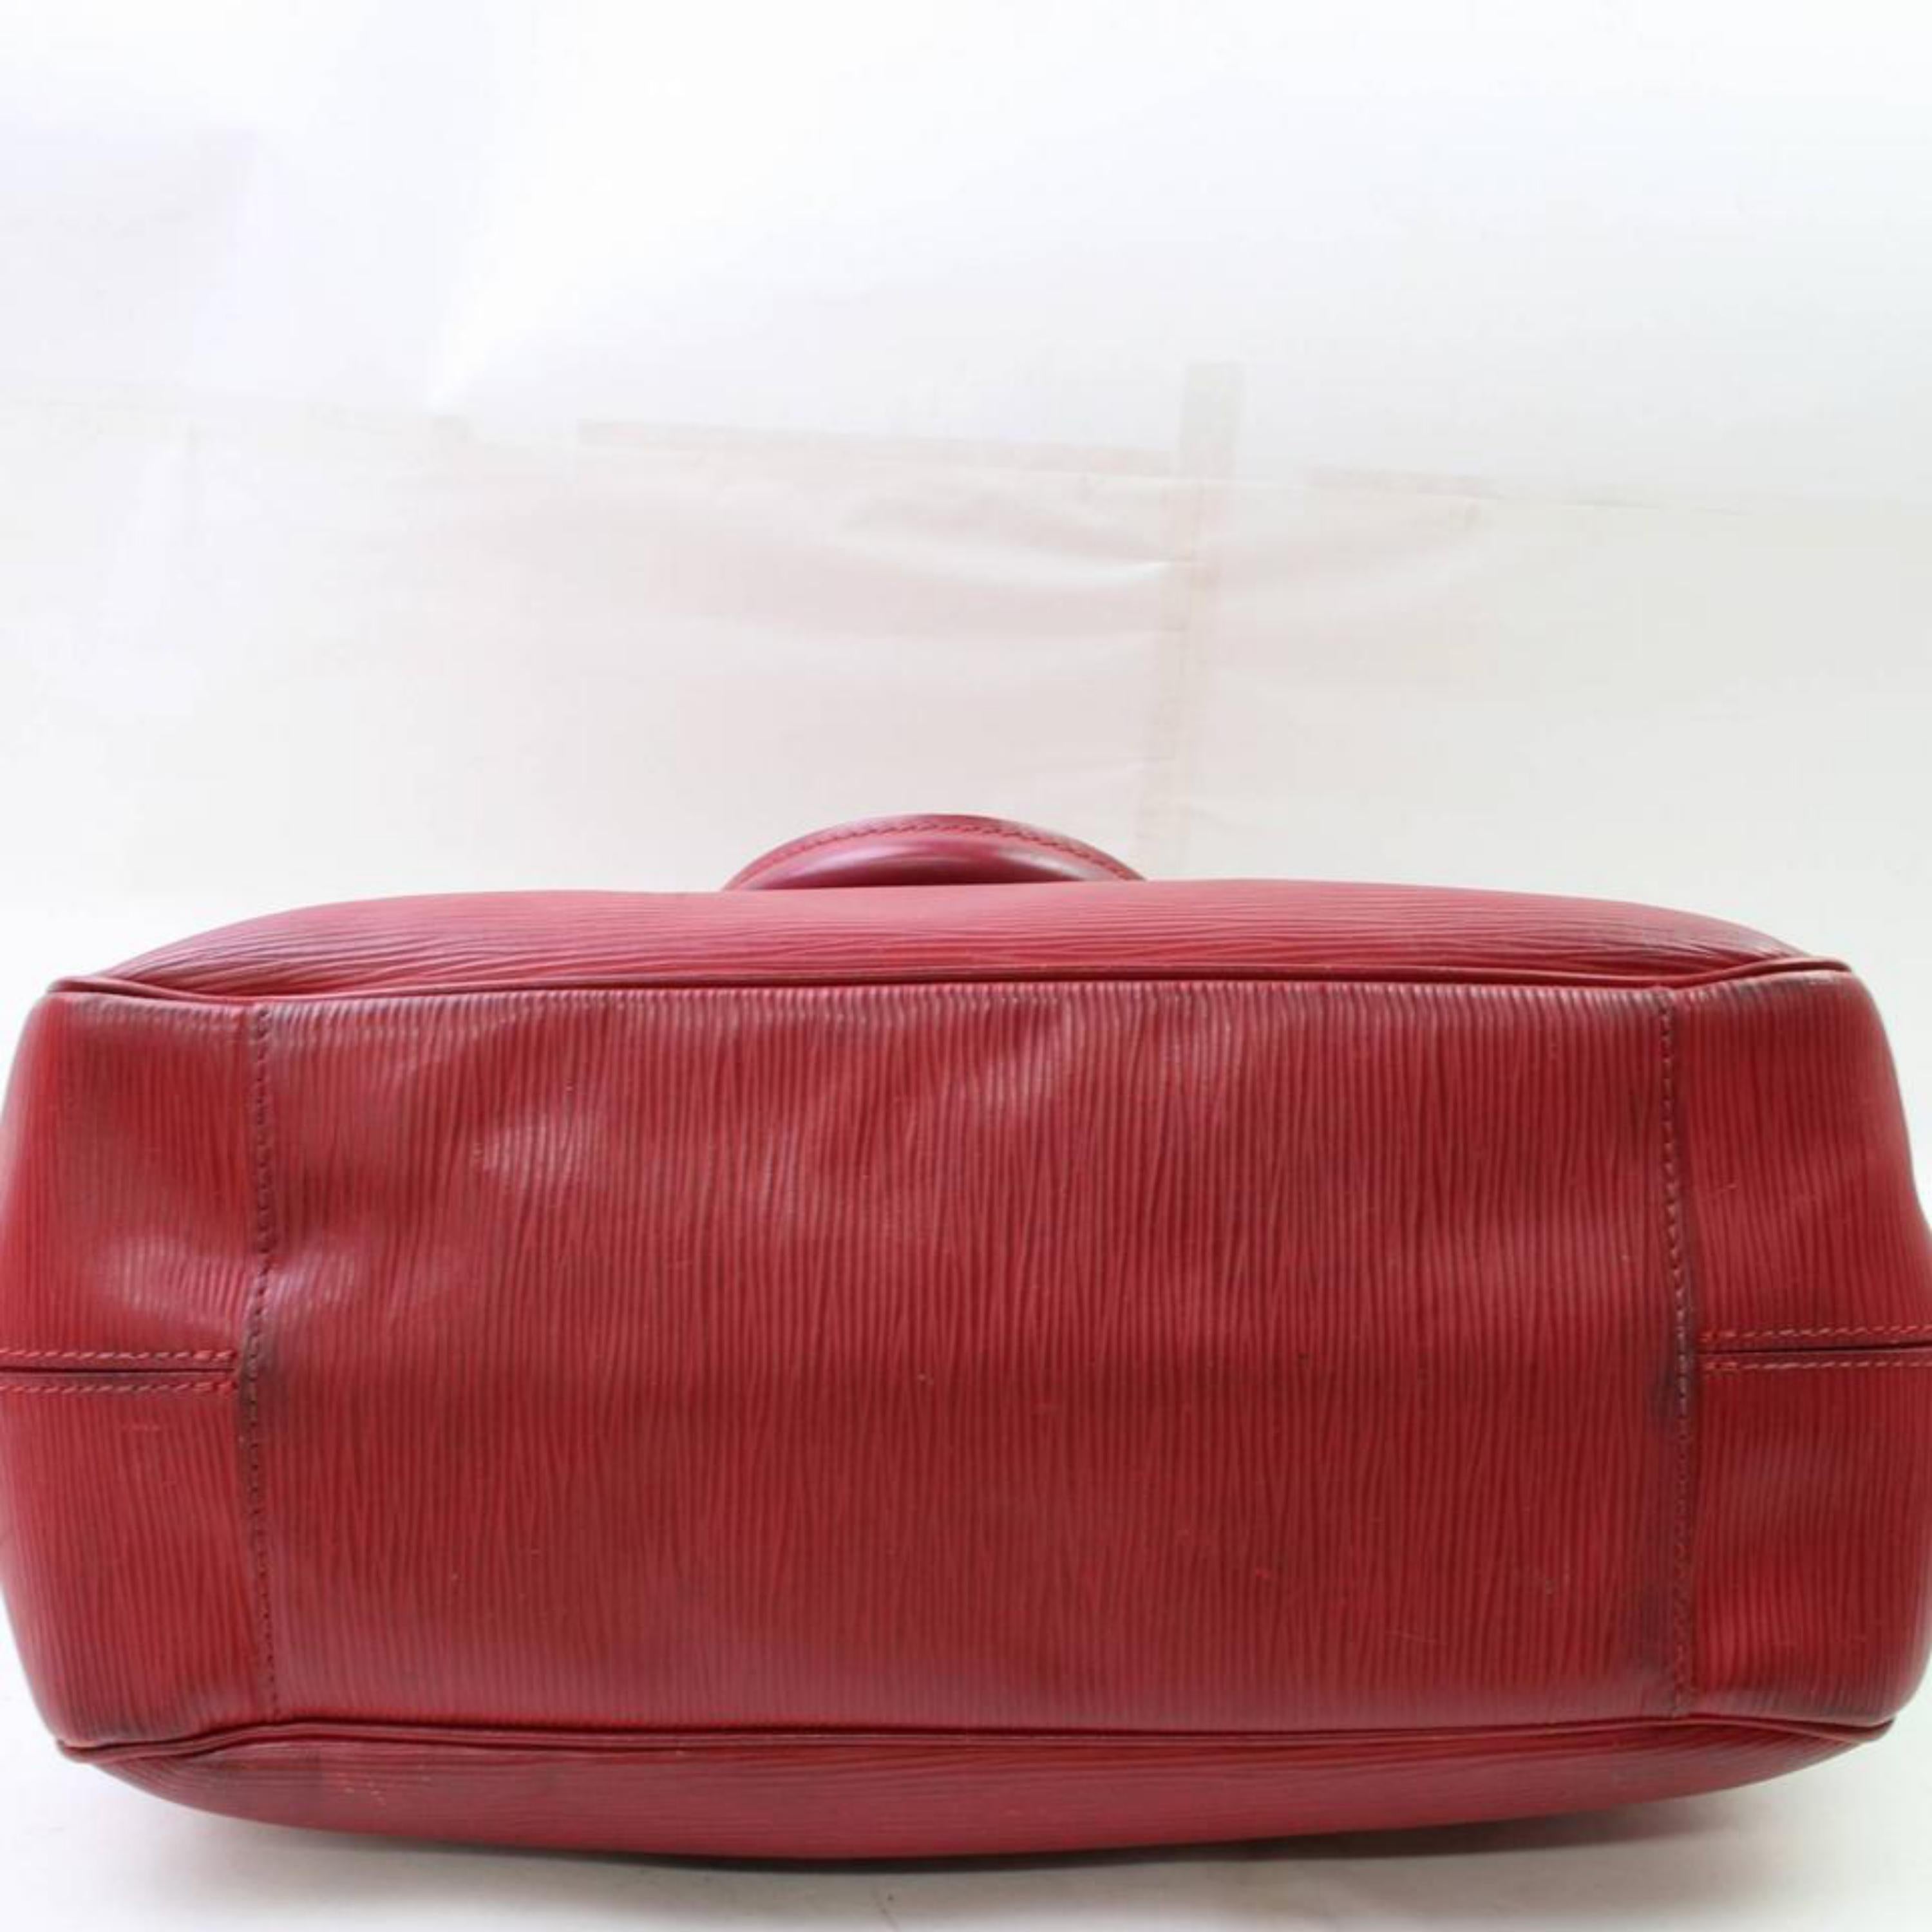 Louis Vuitton Passy Epi Pm 866705 Red Leather Satchel For Sale 2